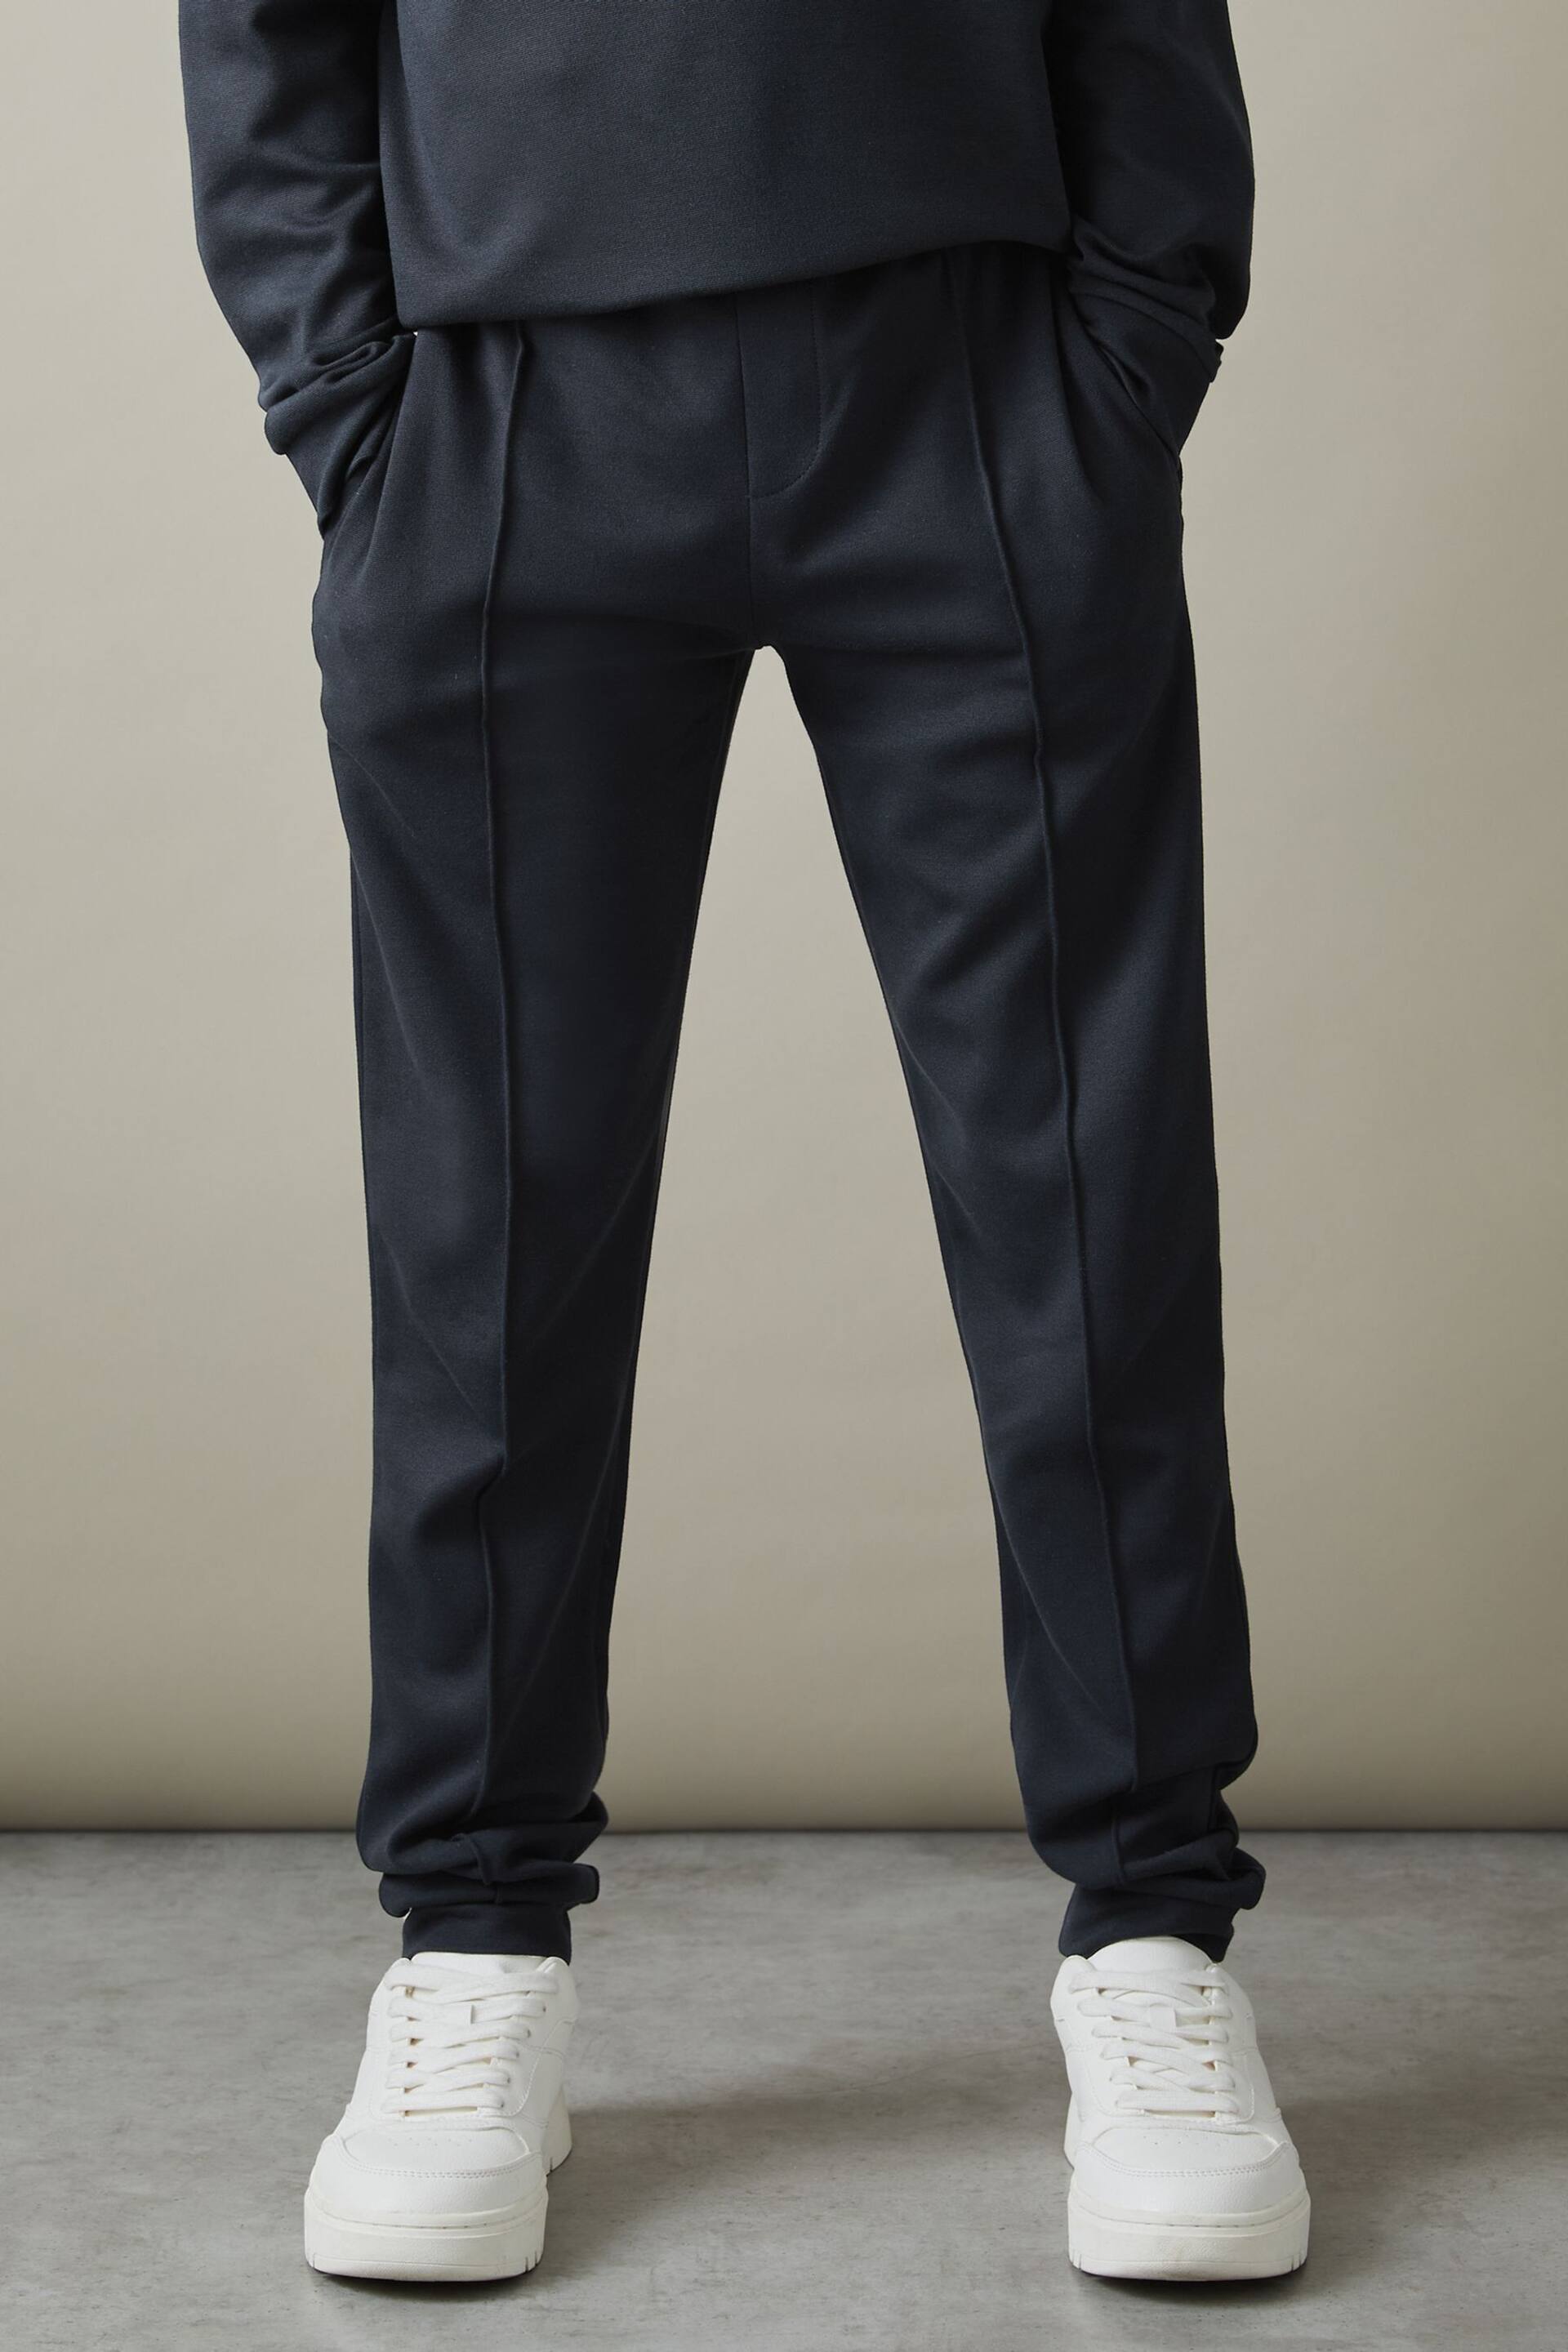 Reiss Navy Croxley Junior Relaxed Drawstring Joggers - Image 1 of 6